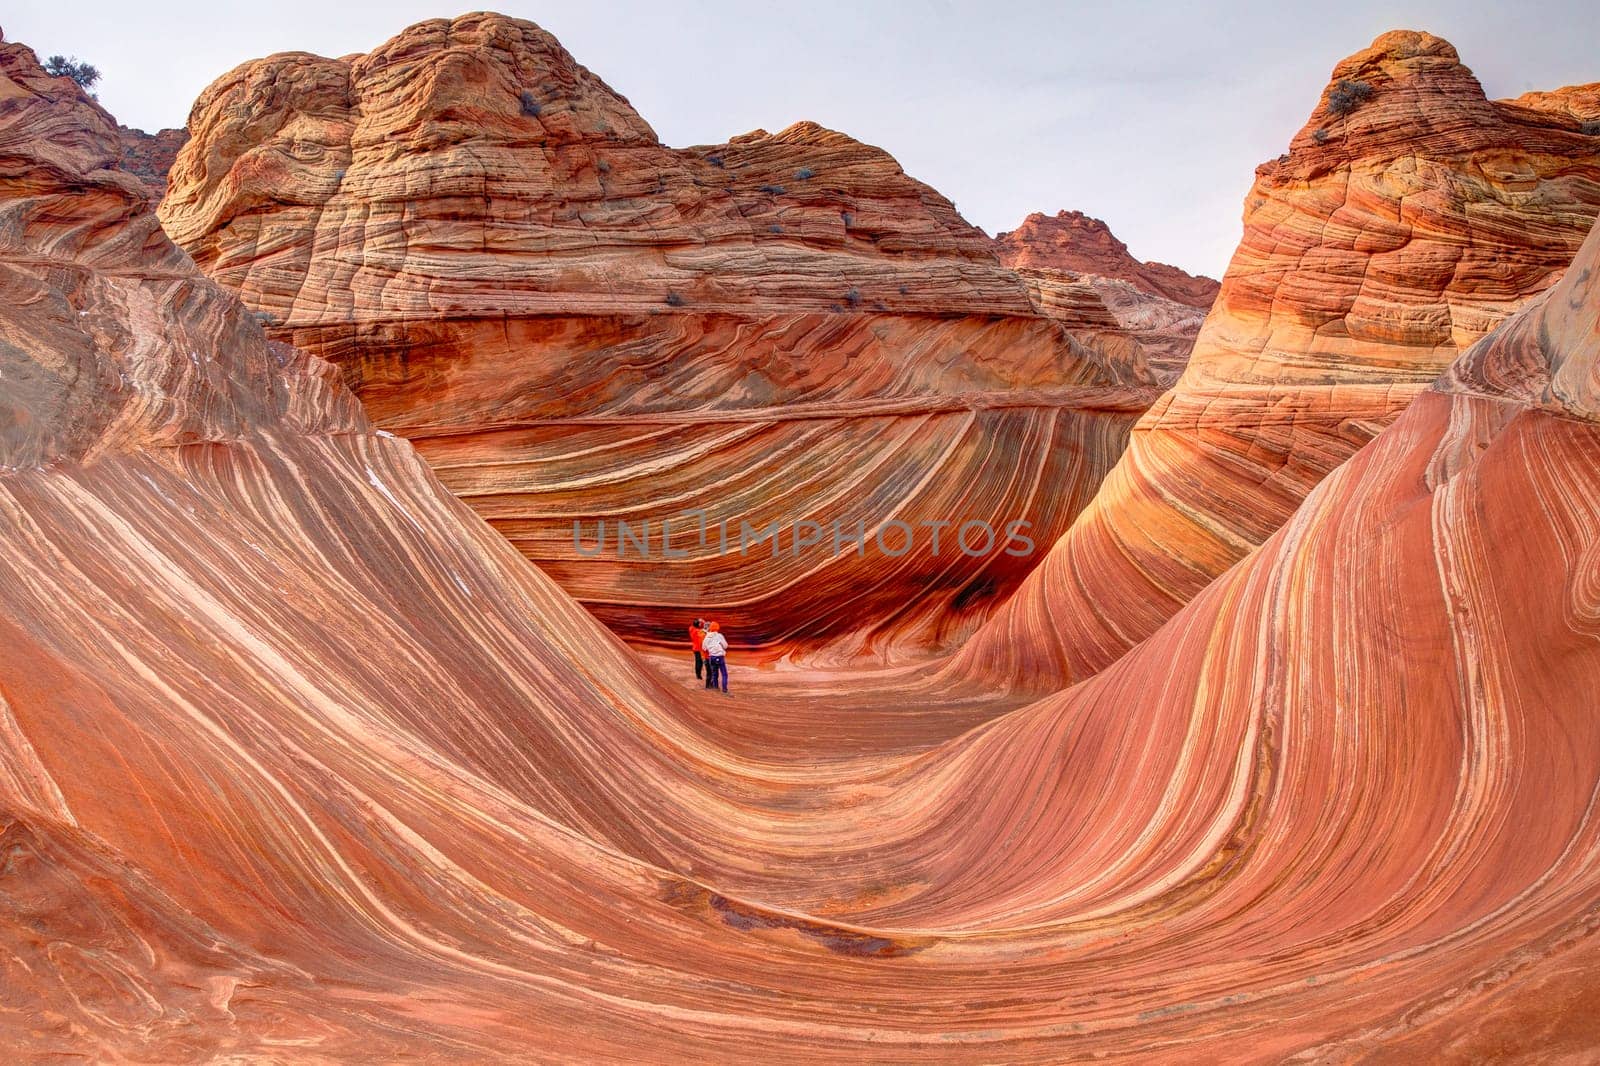 Unusual sandstone rock formation produced through erosion are the feature at The Wave at Coyote Buttes North  in the Vermilion Cliffs National Monument, Arizona